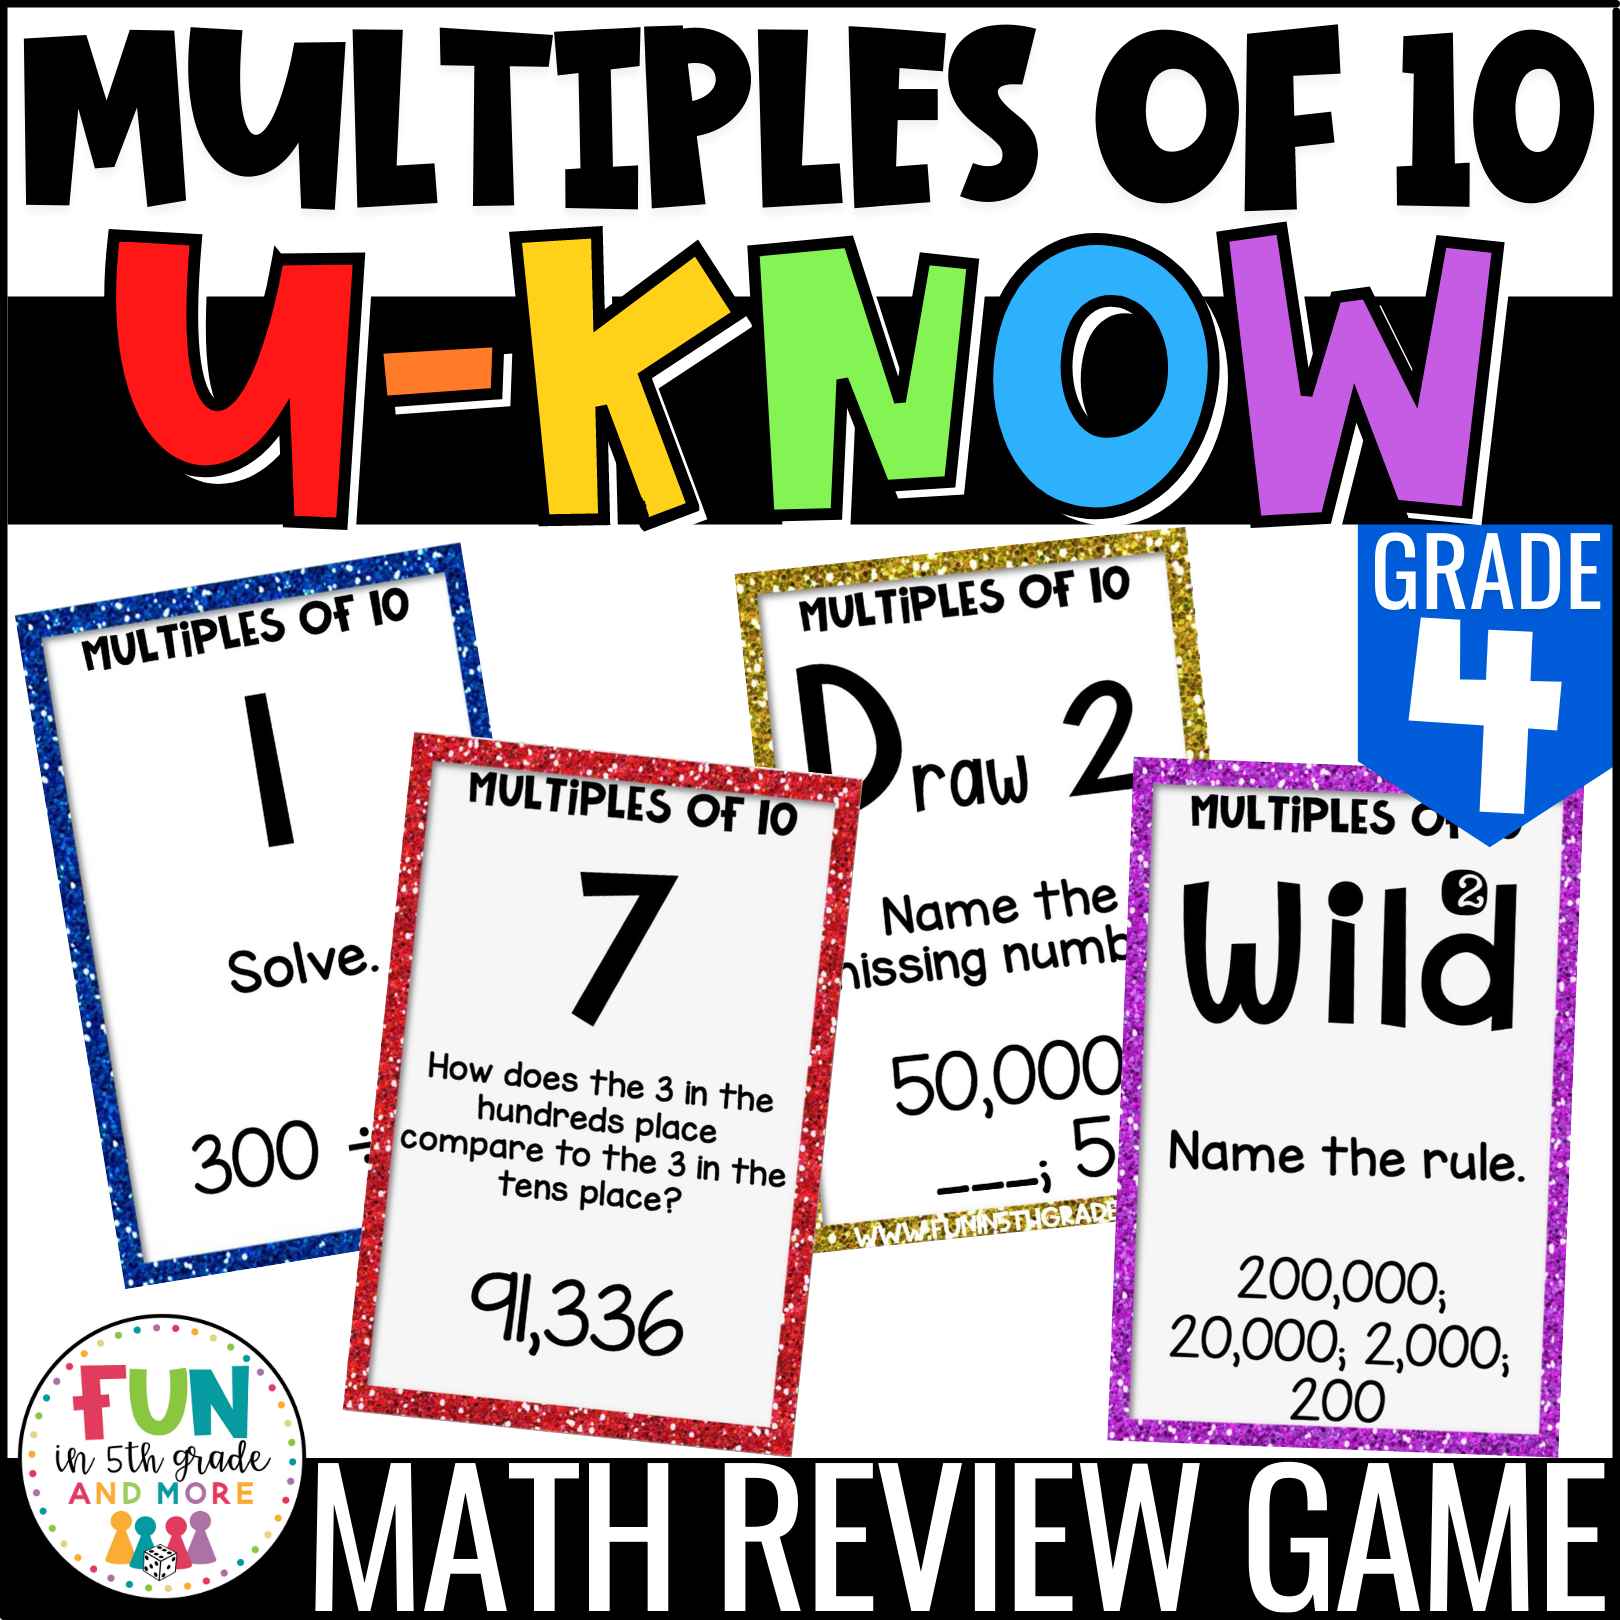 U-Know Multiples of 10 Game